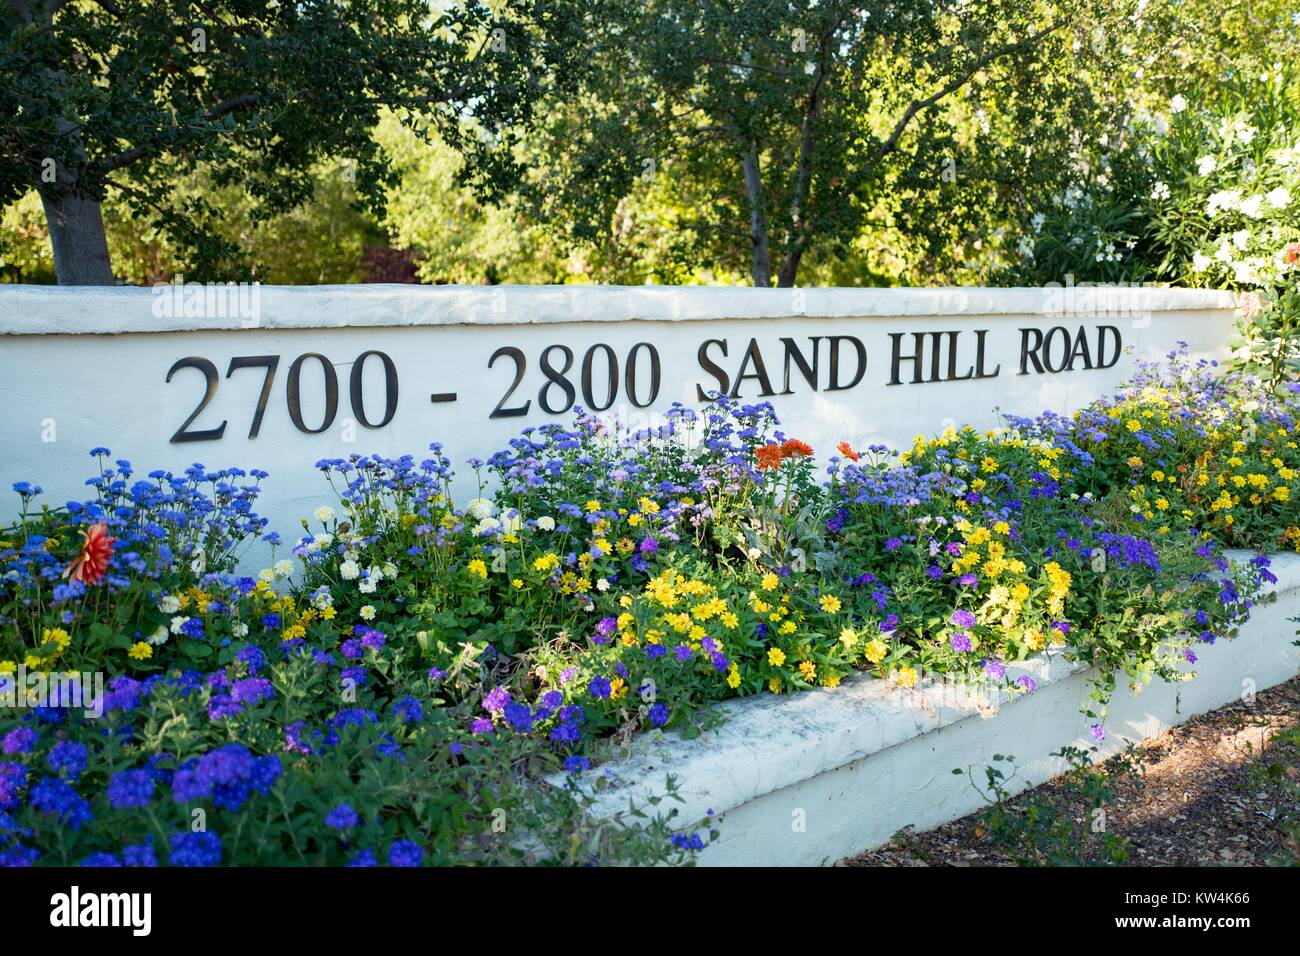 Signage for 2700-2800 Sand Hill Road, with flowers, the headqurters of venture capital investment firms including Sequoia Capital and Kleiner Perkins Caufield Byers, in the Silicon Valley town of Menlo Park, California, August 25, 2016. In Silicon Valley culture, 'Sand Hill Road' is used as a metonym for the venture capital industry, as many prominent venture capital firms have offices along the road. Stock Photo